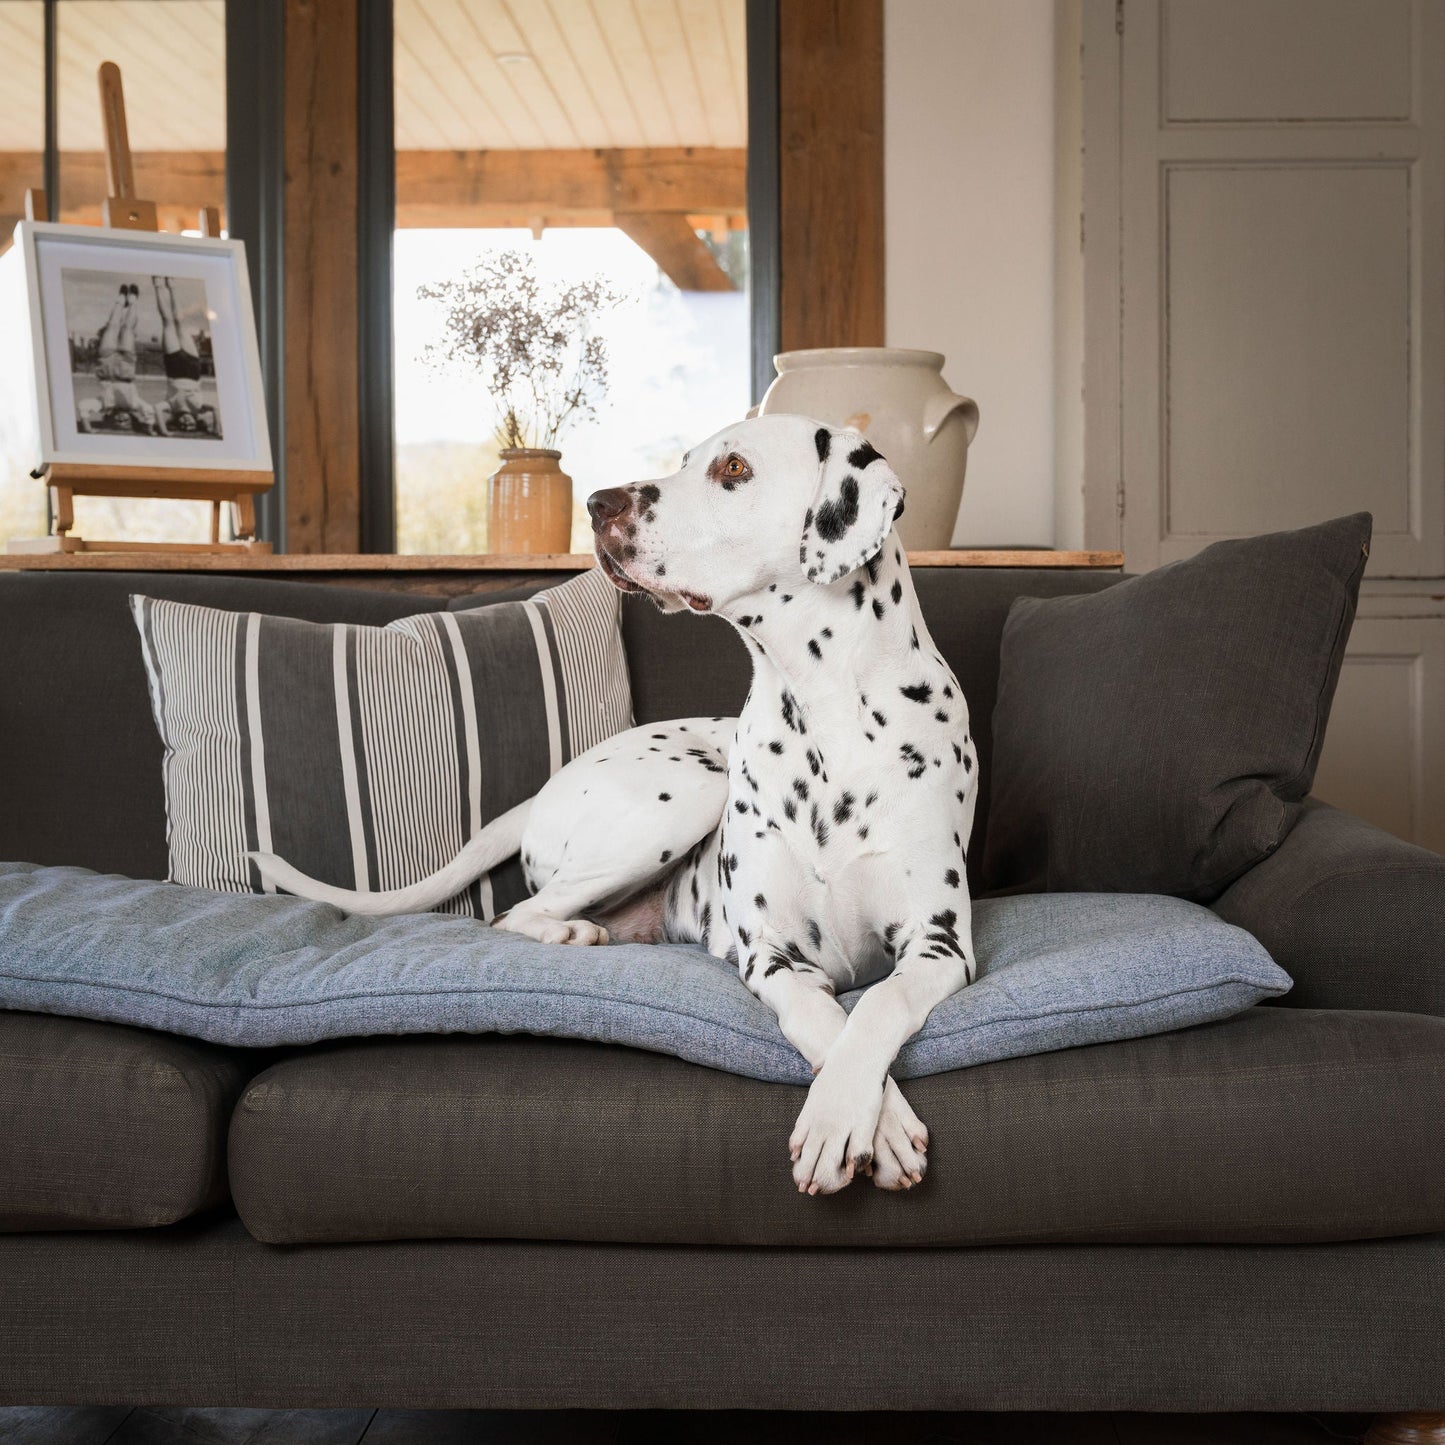 Discover Our Luxury Inchmurrin Sofa Topper, The Perfect Sofa Protector For Pets, In Stunning Grey Iceberg Available Now at Lords & Labradors